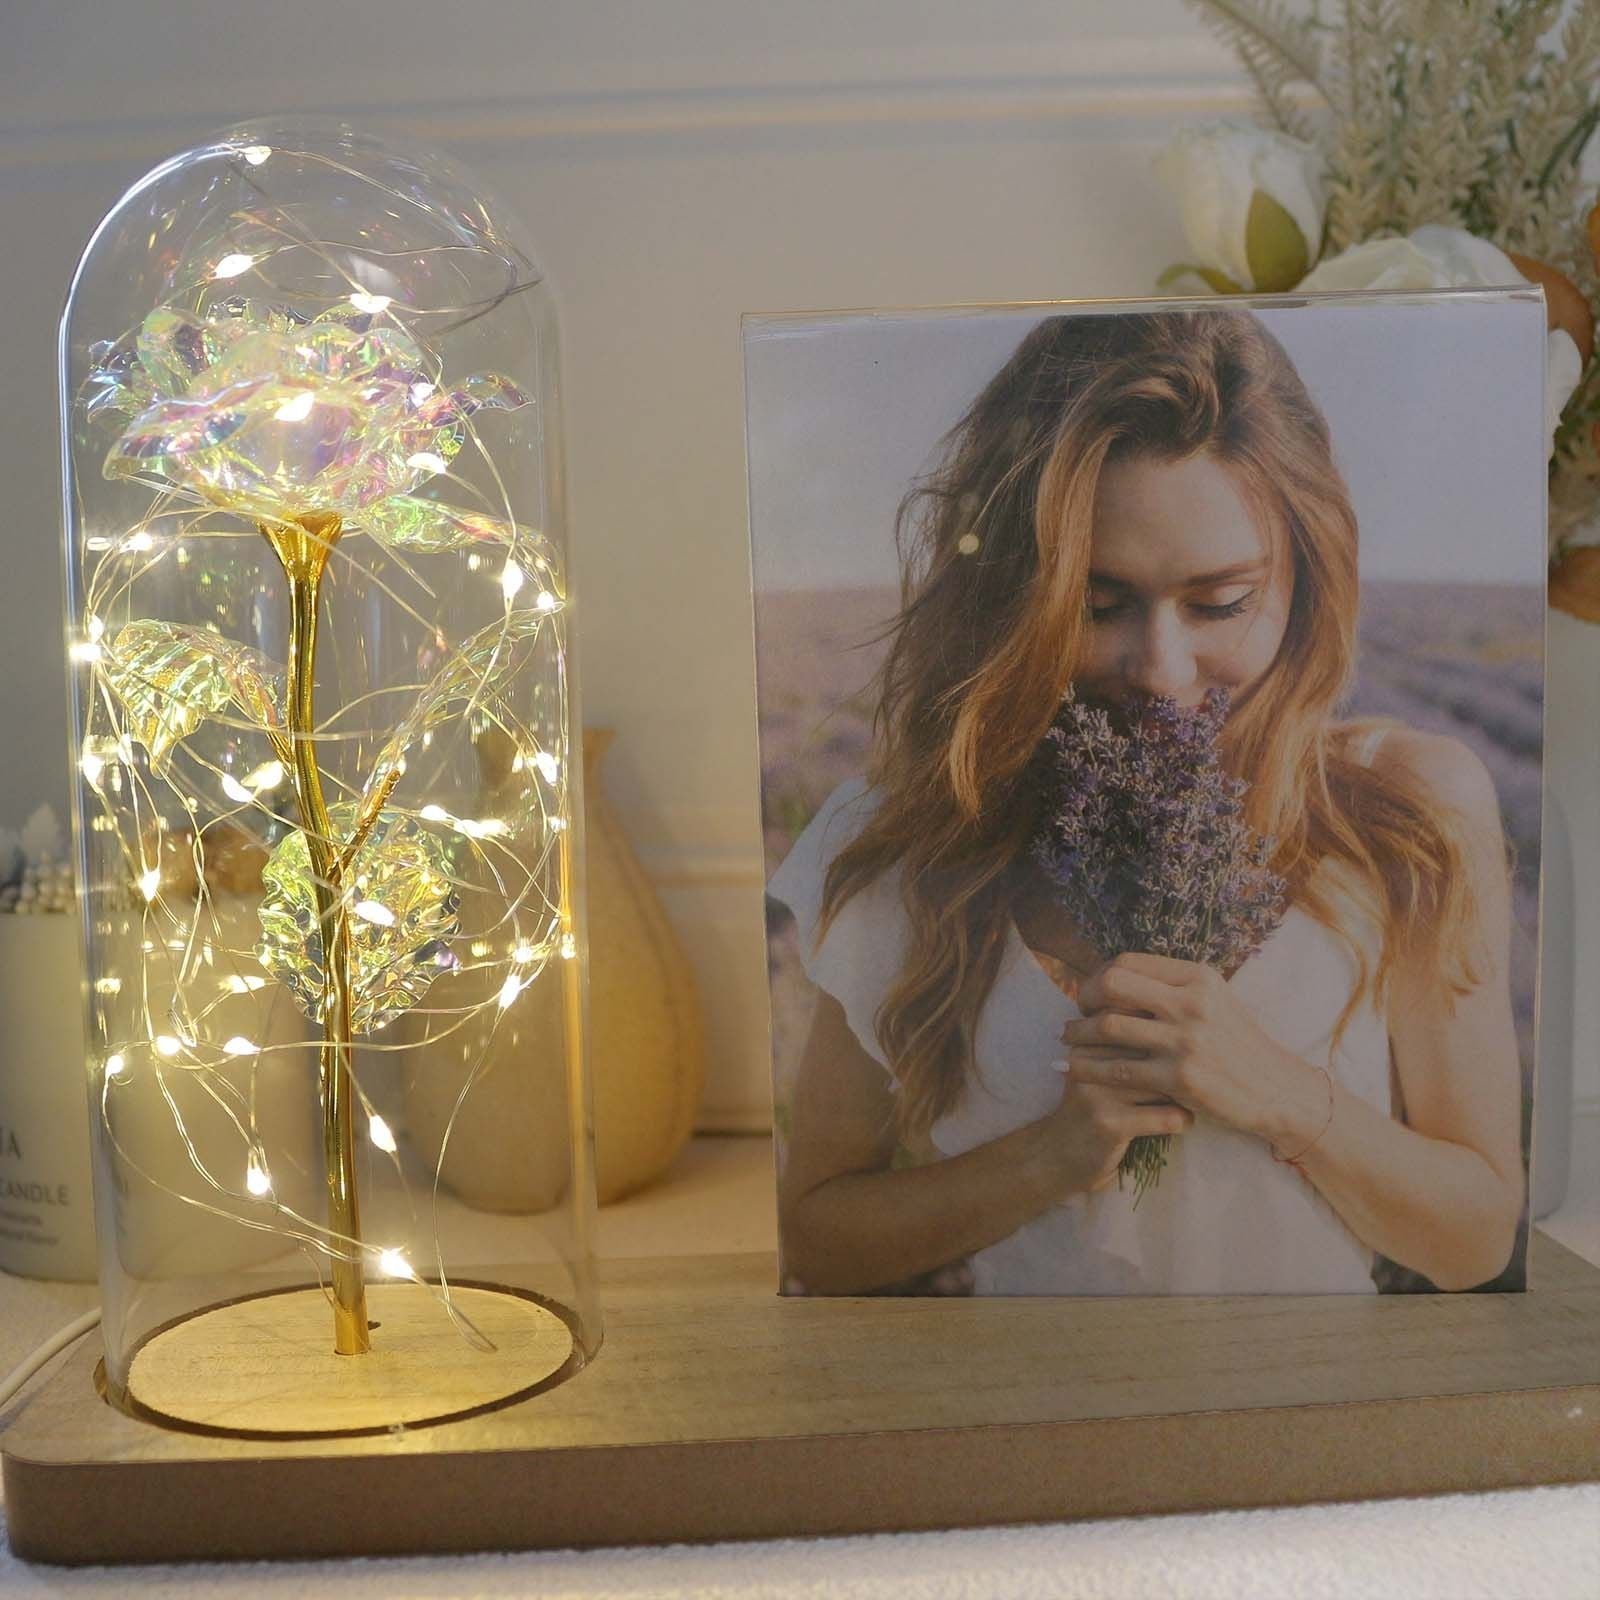 Romantic Galaxy Light Up Rose in Glass Dome with photo frame ornaments, beauty and the beast rose, eternal Rose Flower Gifts for Valentine's Day, Mother's Day, Birthday - uniqicon